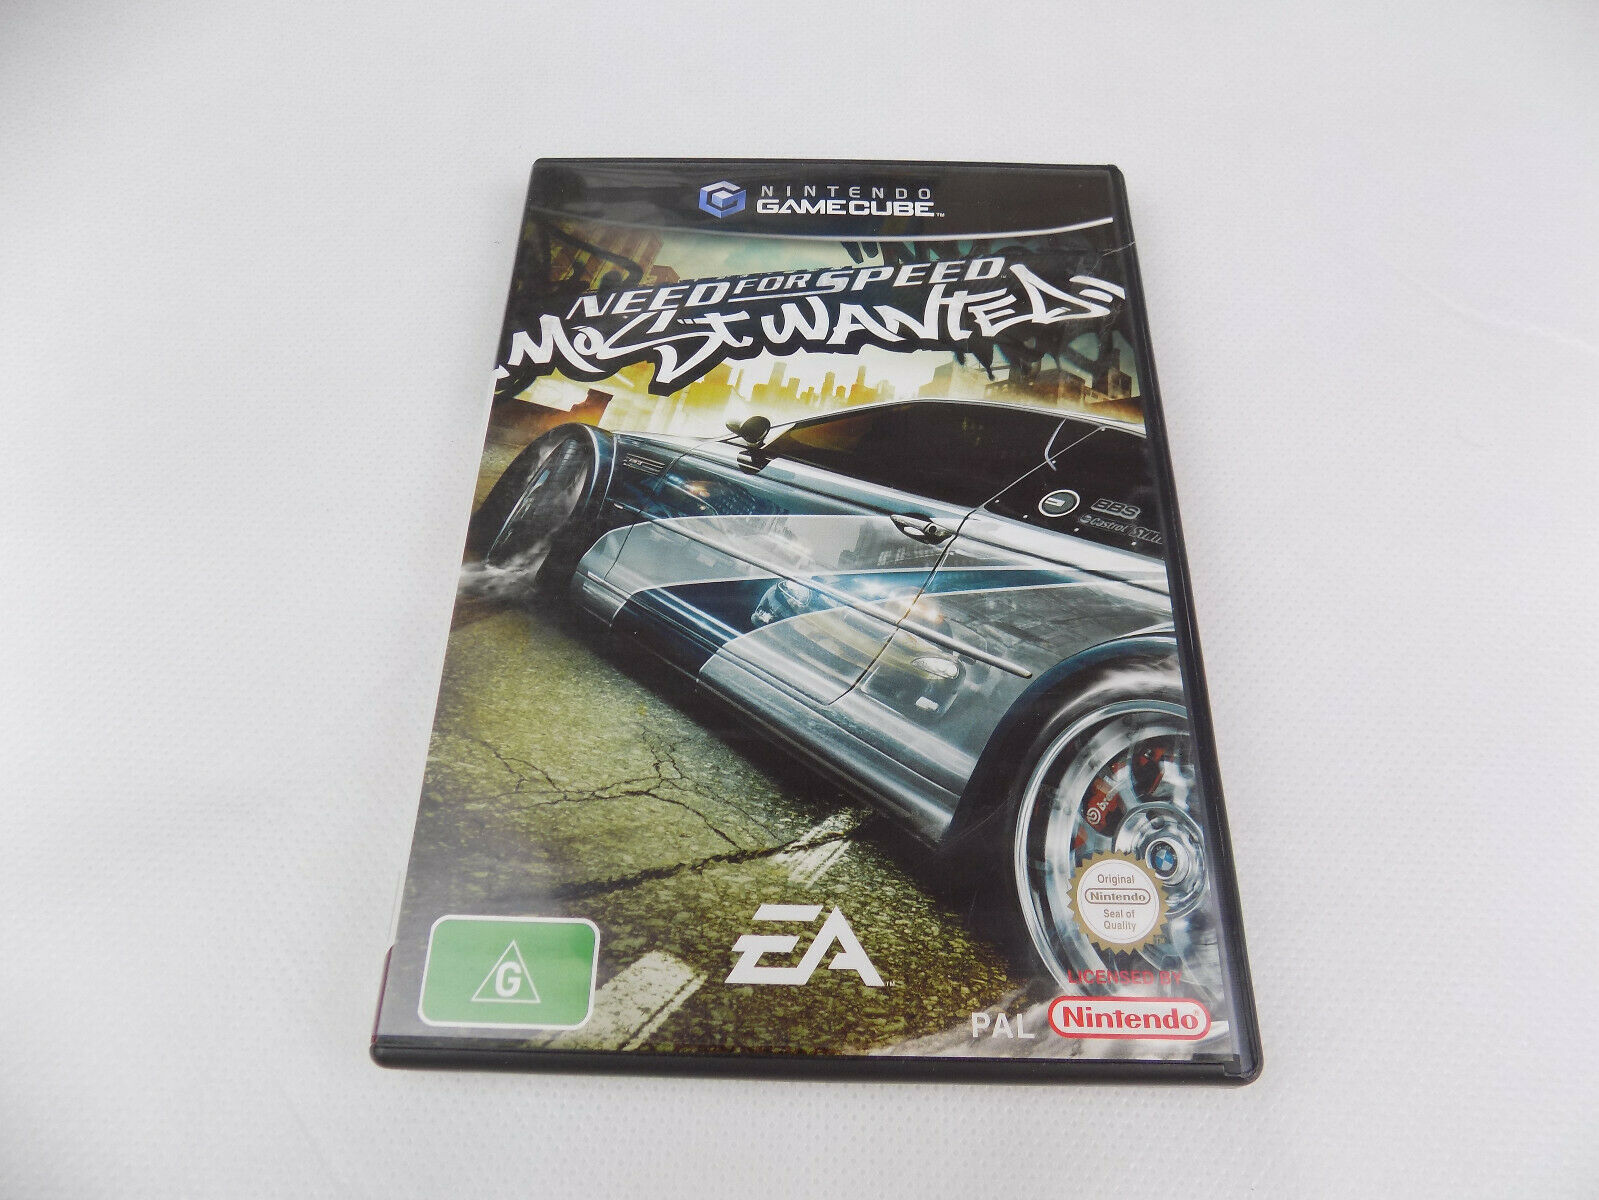 Mint Disc Nintendo Gamecube Need For Speed Most Wanted AUS PAL - Inc ...